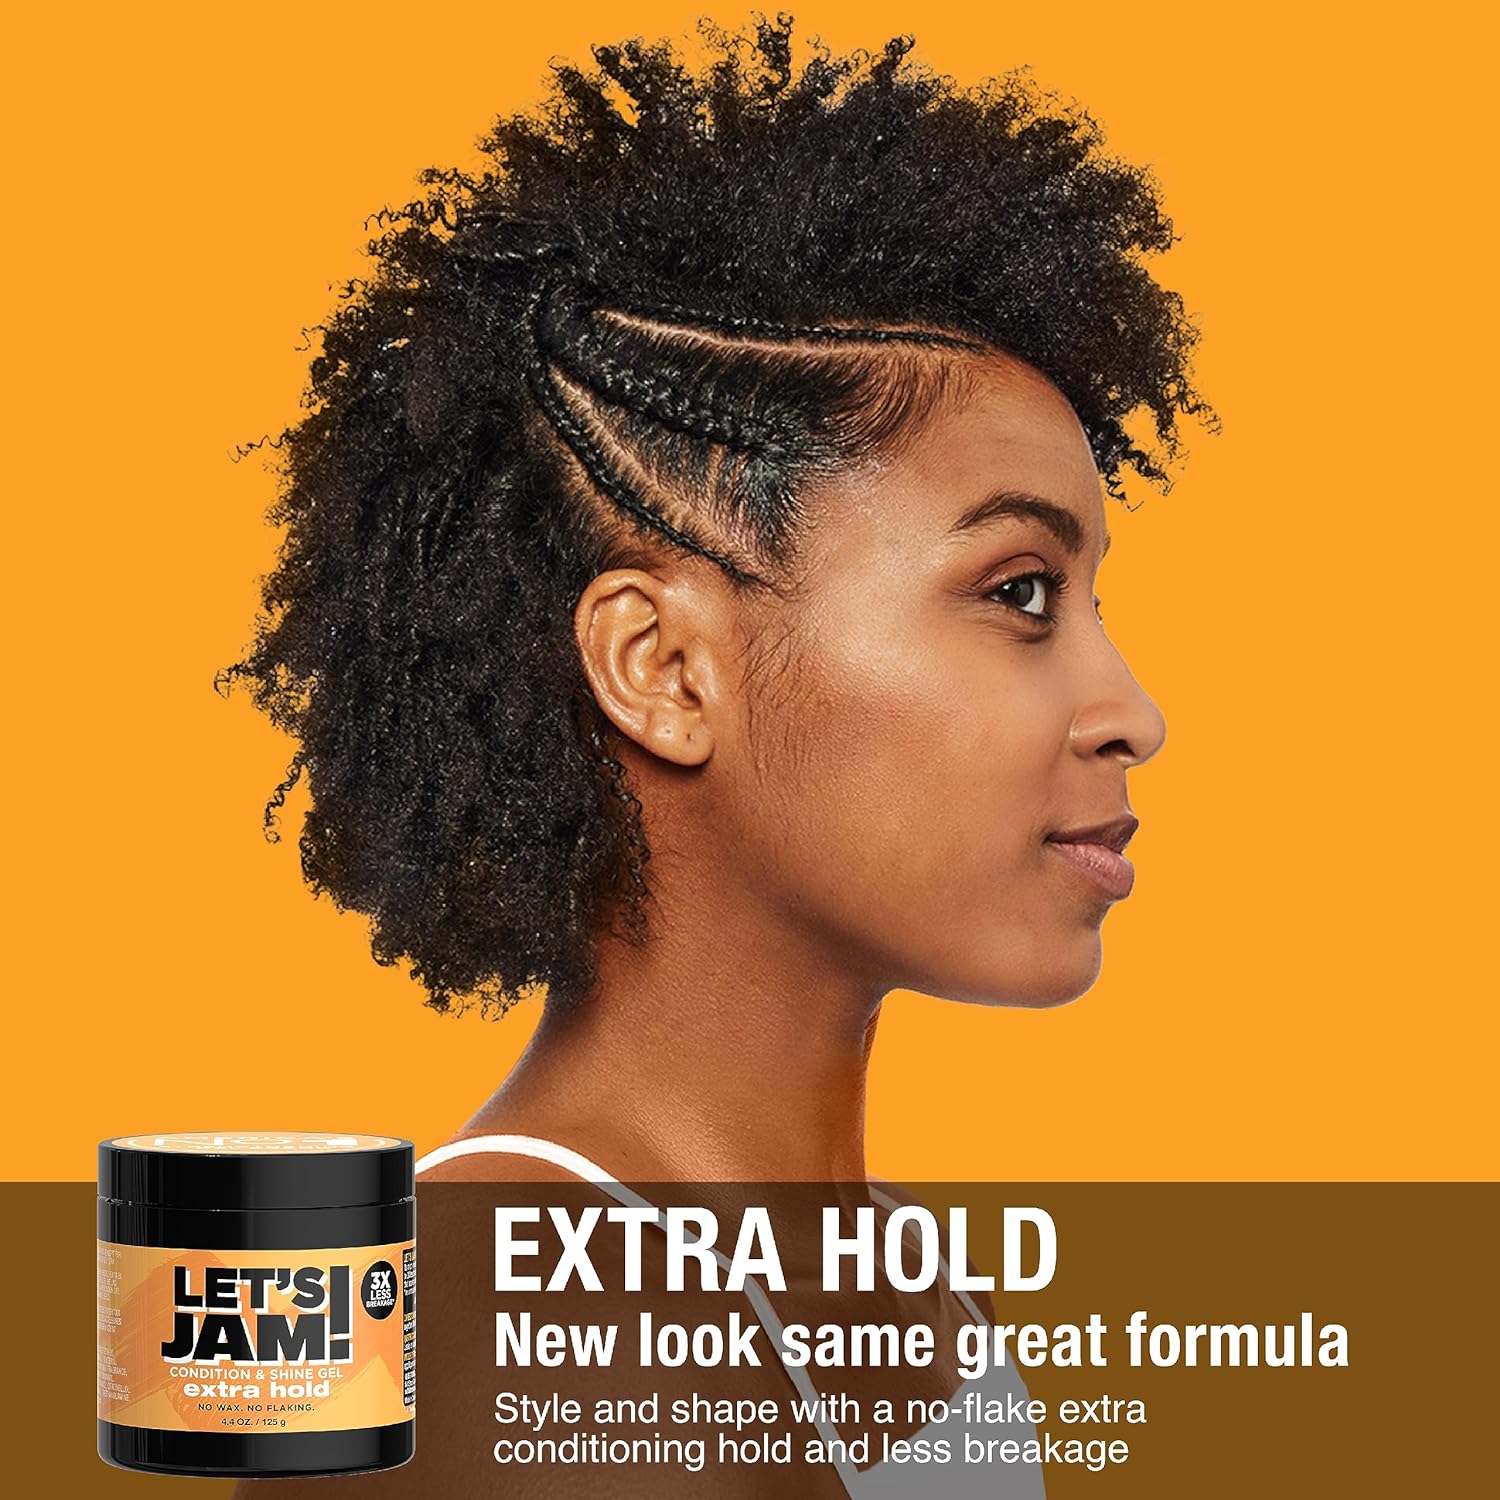 SoftSheen-Carson Let's Jam! Shining and Conditioning Hair Gel by Dark and Lovely, Extra Hold, All Hair Types, Styling Gel Great for Braiding, Twisting & Smooth Edges, Extra Hold, 4.4 oz : Hair Styling Gels : Beauty & Personal Care